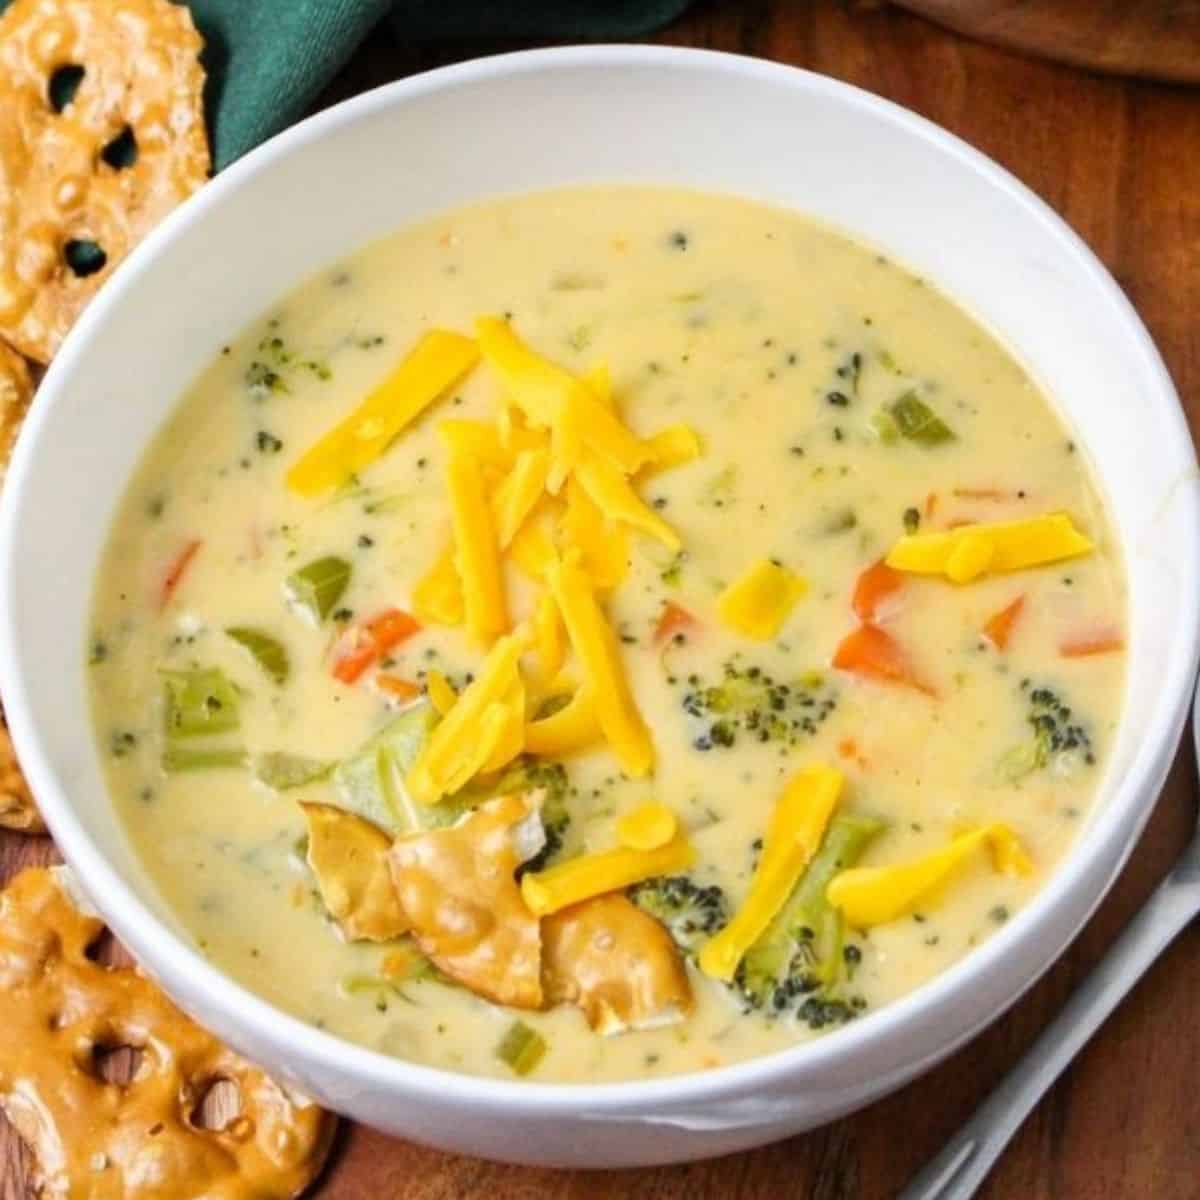 A bowl of broccoli beer cheese soup with shredded cheese.